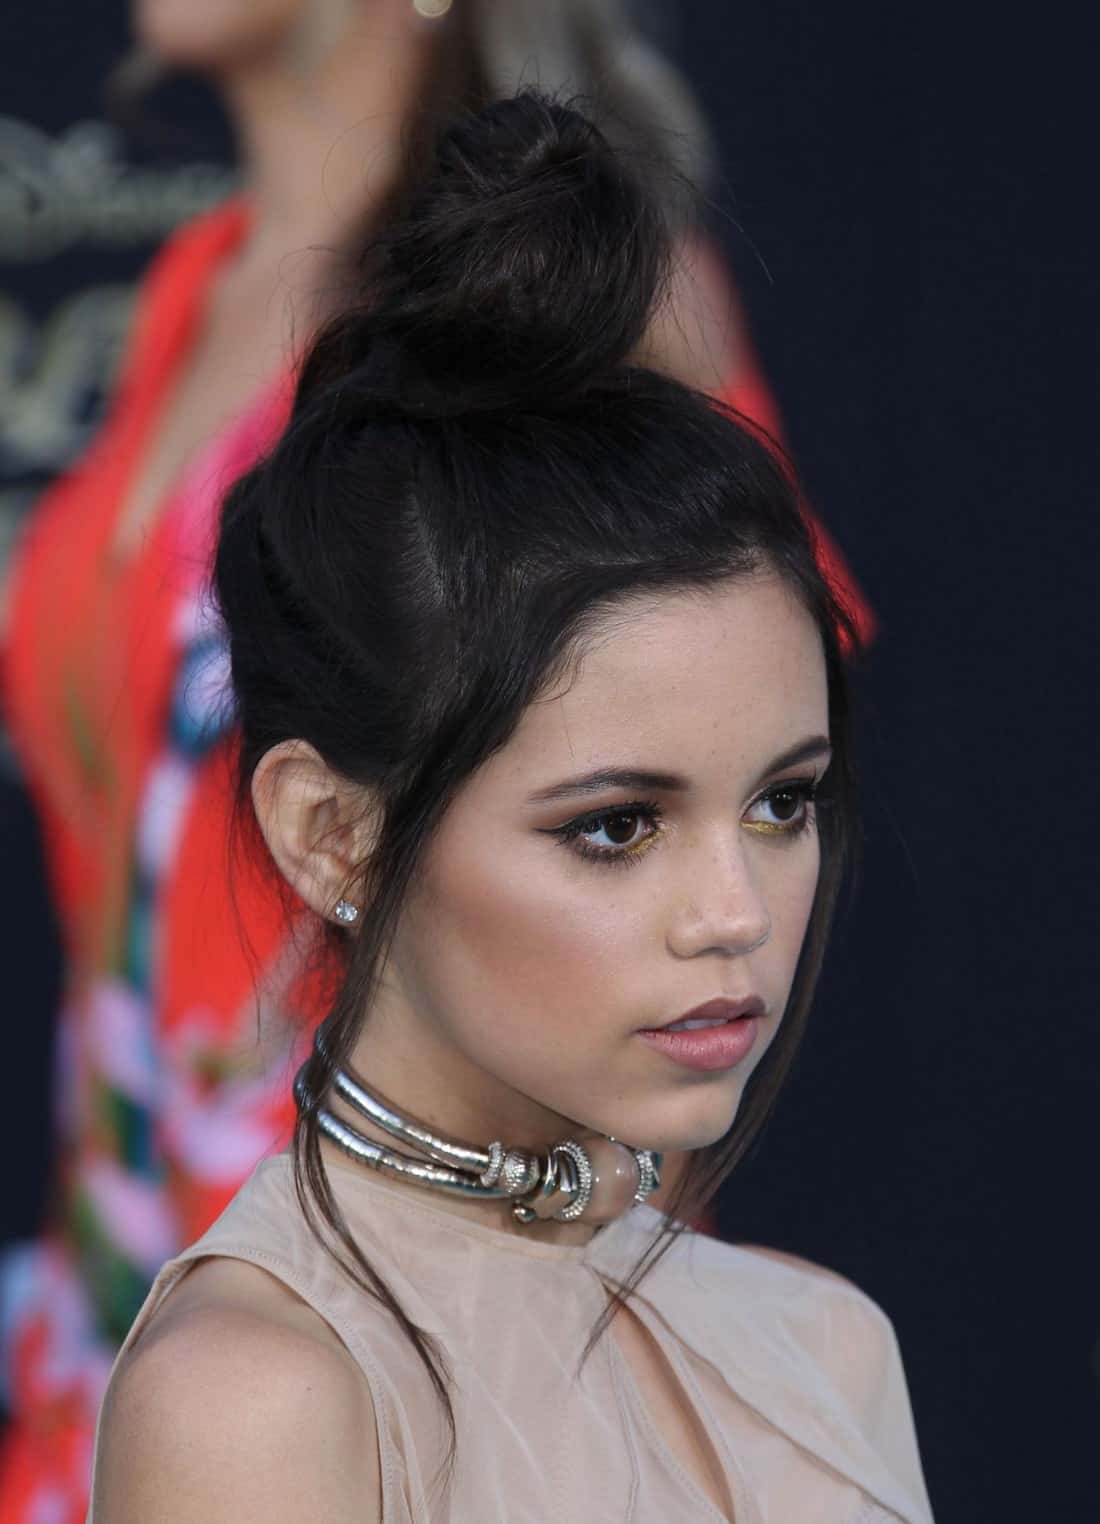 Jenna Ortega Dazzles at Pirates of the Caribbean Premiere with Trendy Outfit